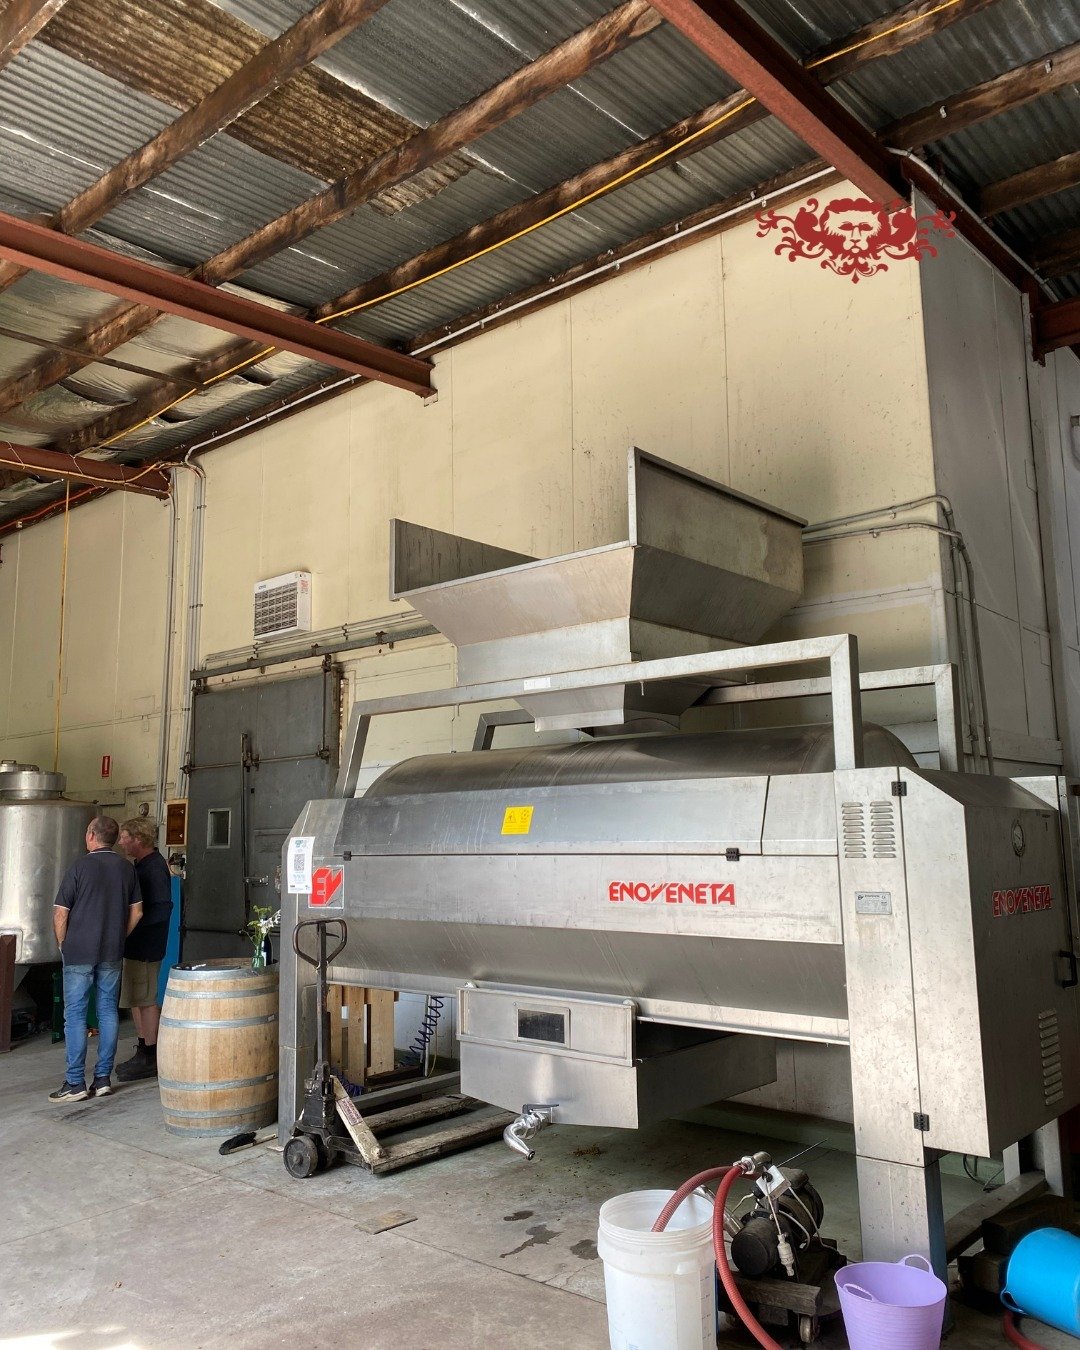 The Mighty Press putting in the hard work for Vintage 24. We just have our Hillside Chardonnay to go for the season 🍇⁠
⁠
#morningtonpeninsula #mpwine #wine #cellardoor #winemaking #chardonnay⁠